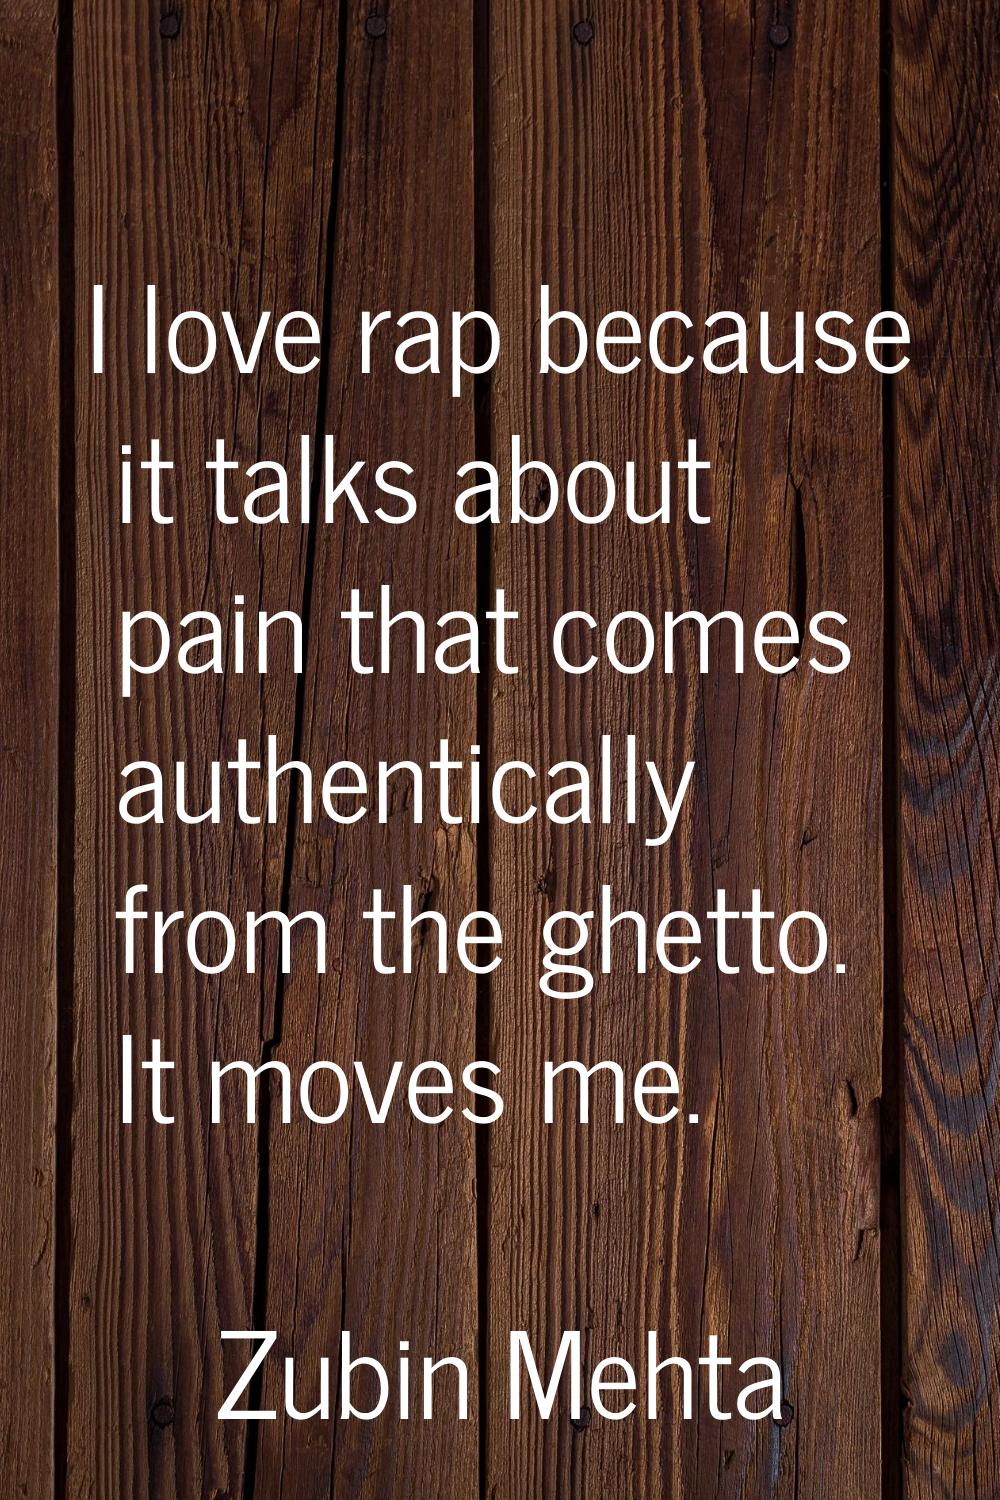 I love rap because it talks about pain that comes authentically from the ghetto. It moves me.